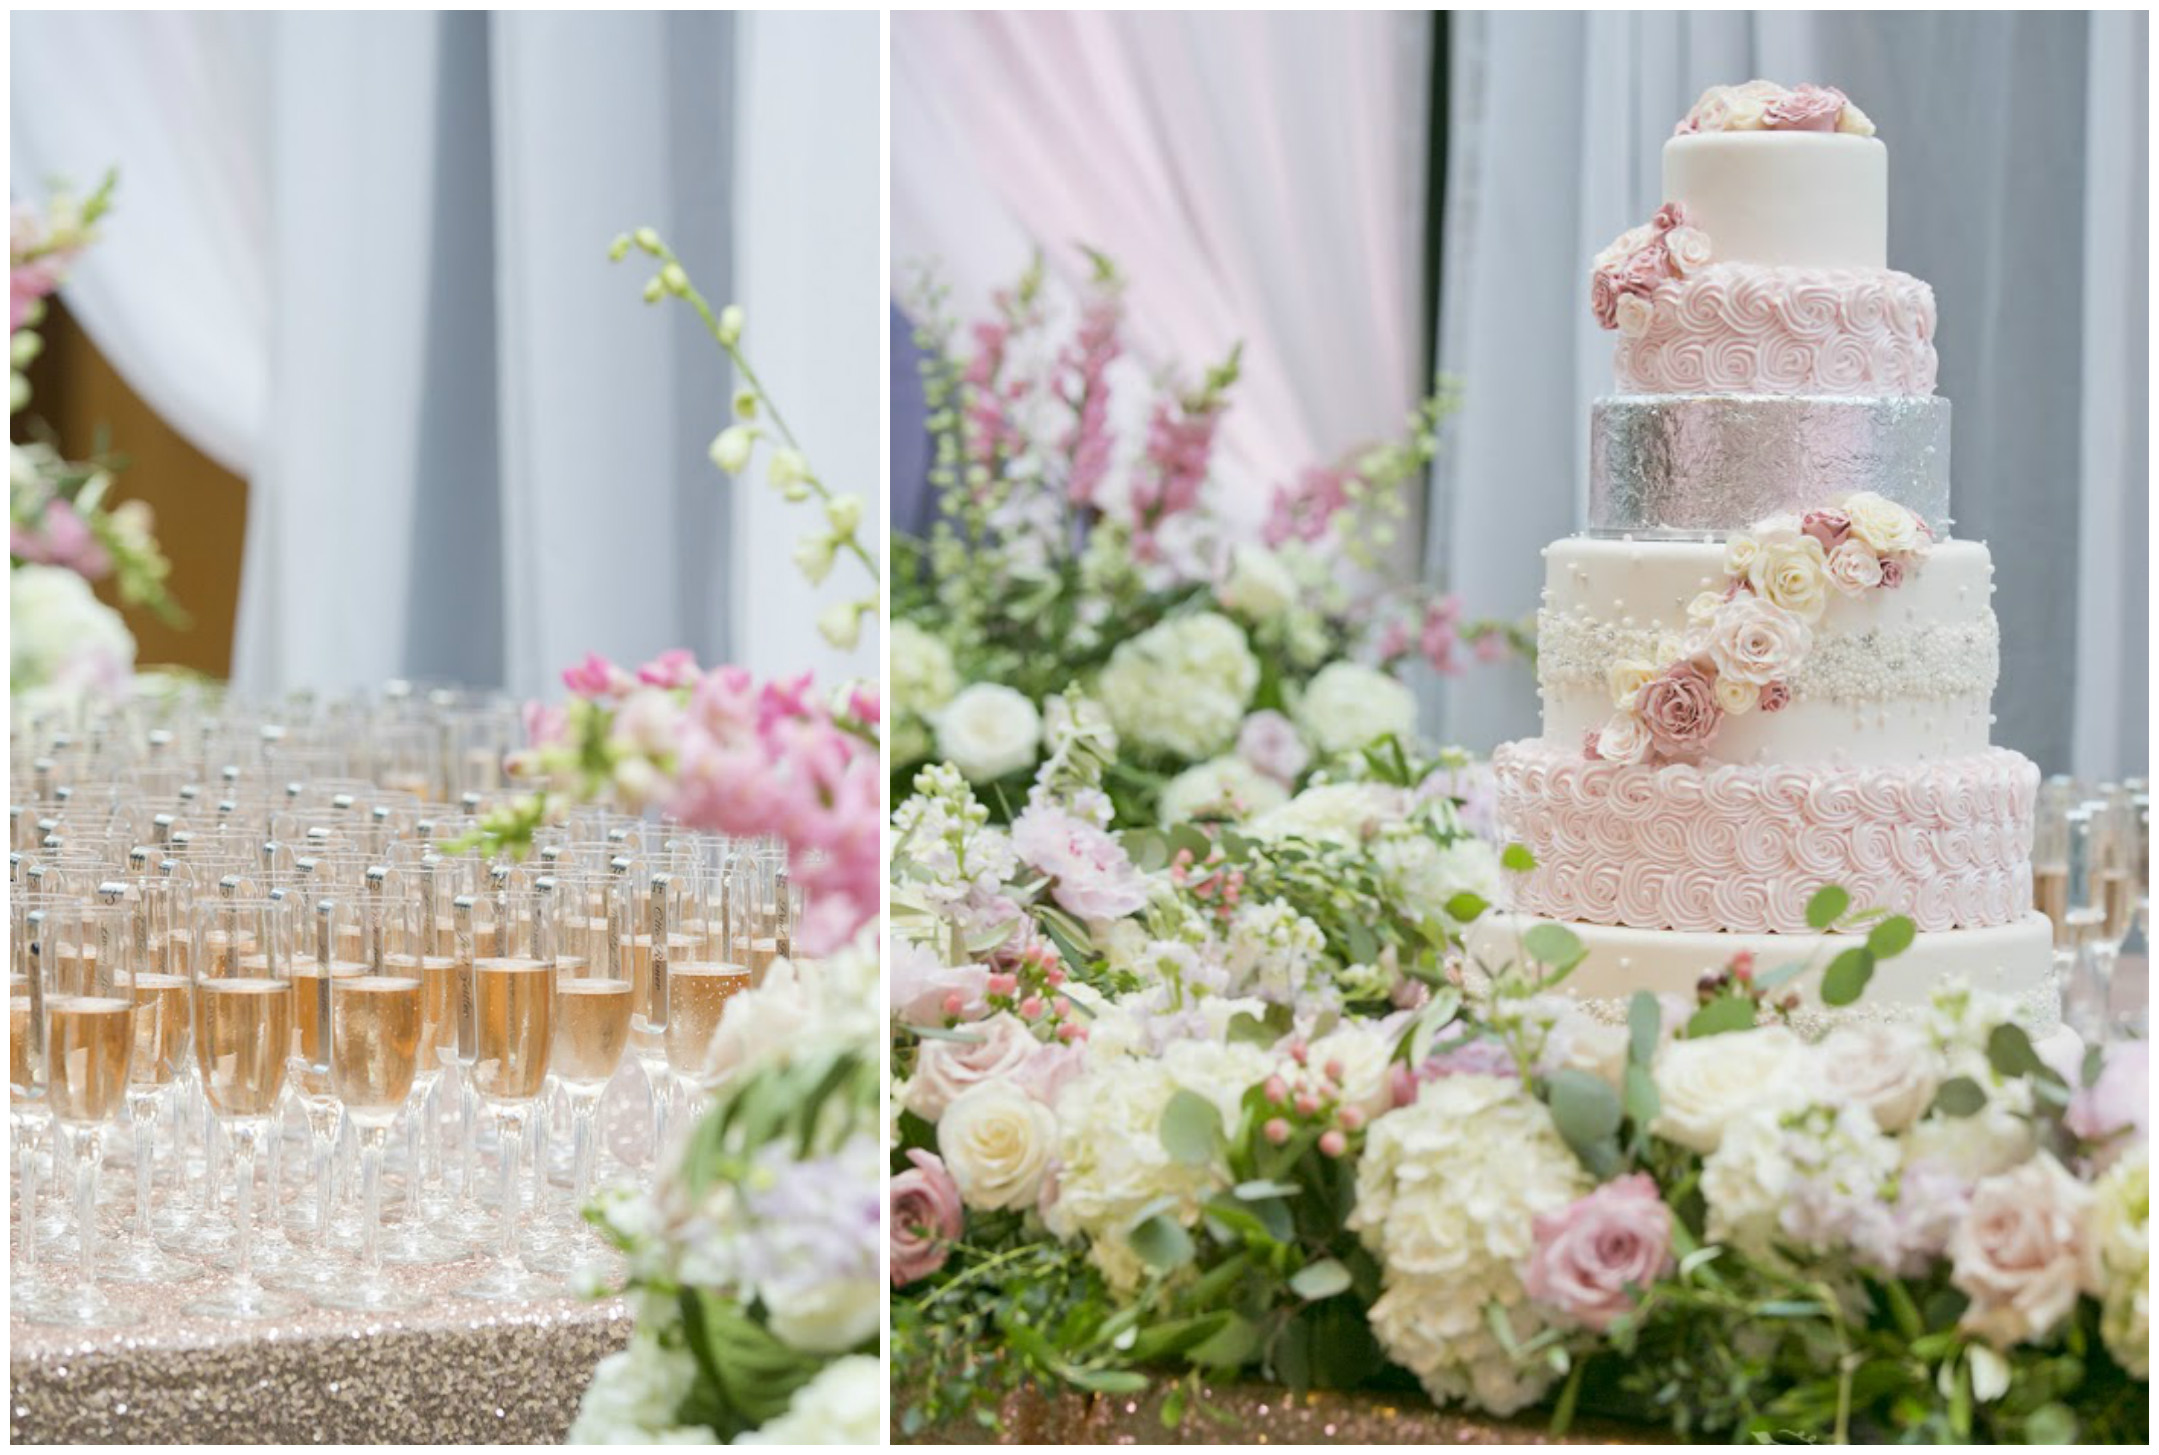 Champagne and Floral Wedding Cake | BBJ Linen